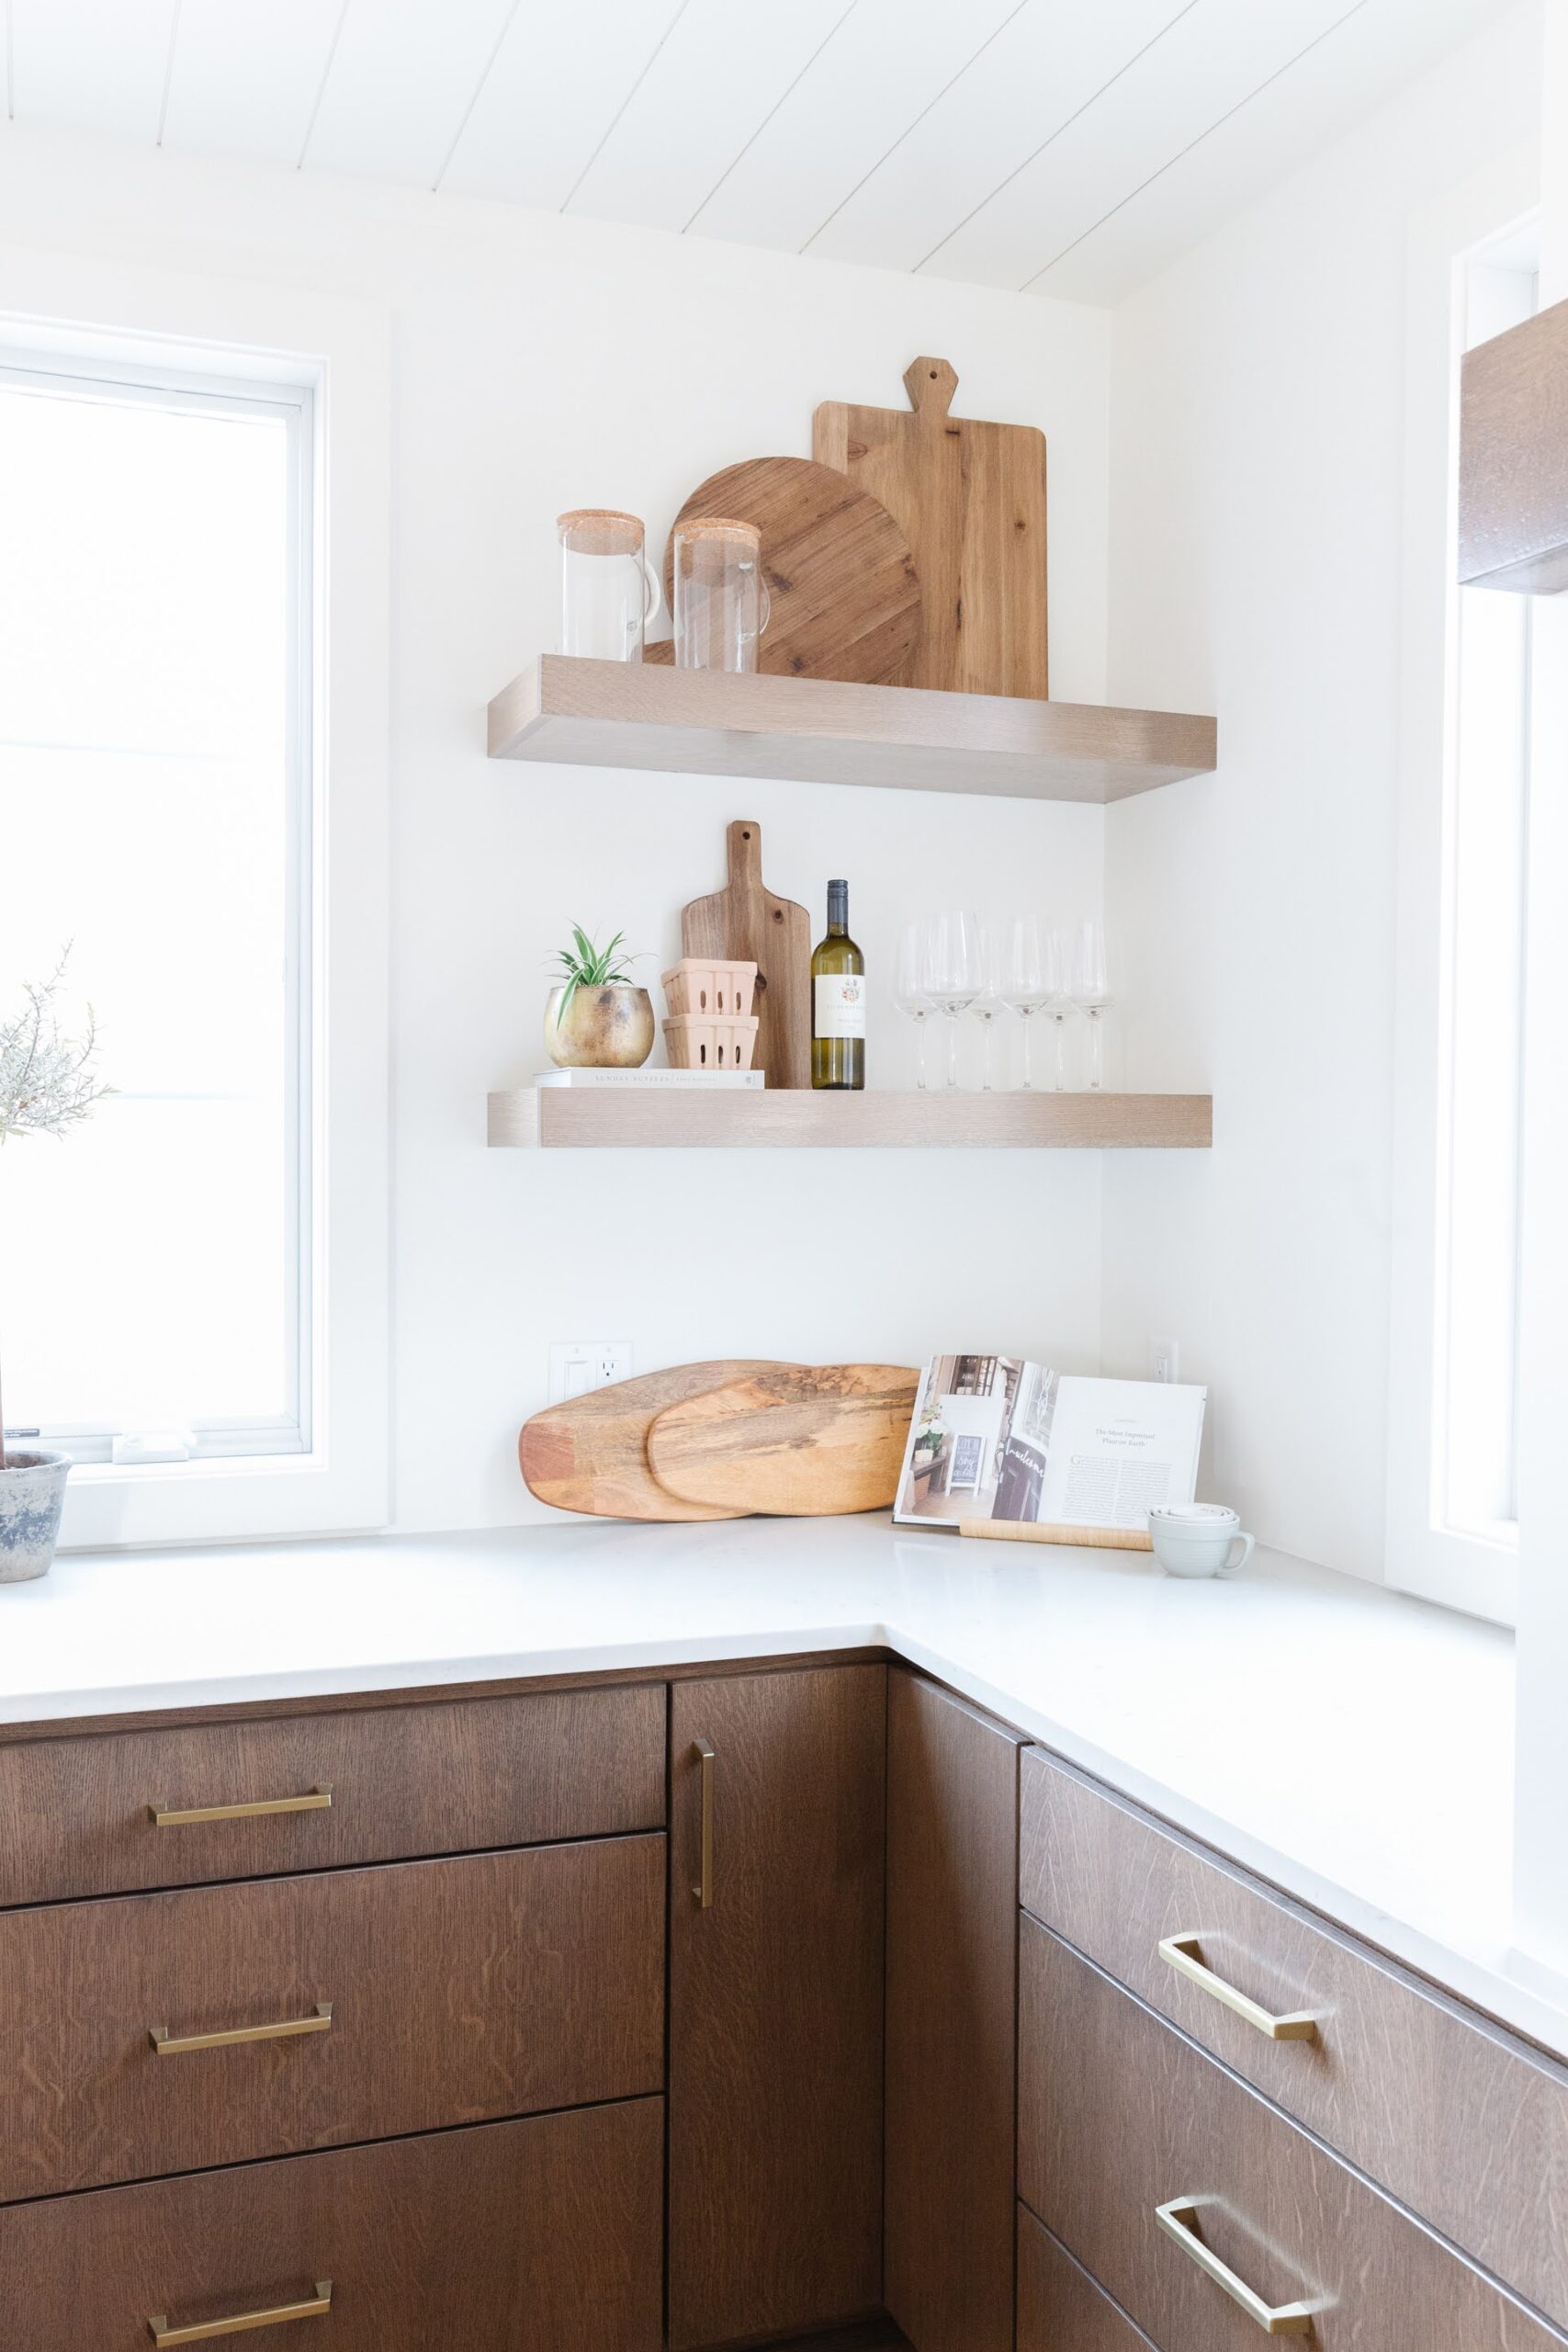 8 Easy Ways To Update Your Kitchen Cabinets Without renovating